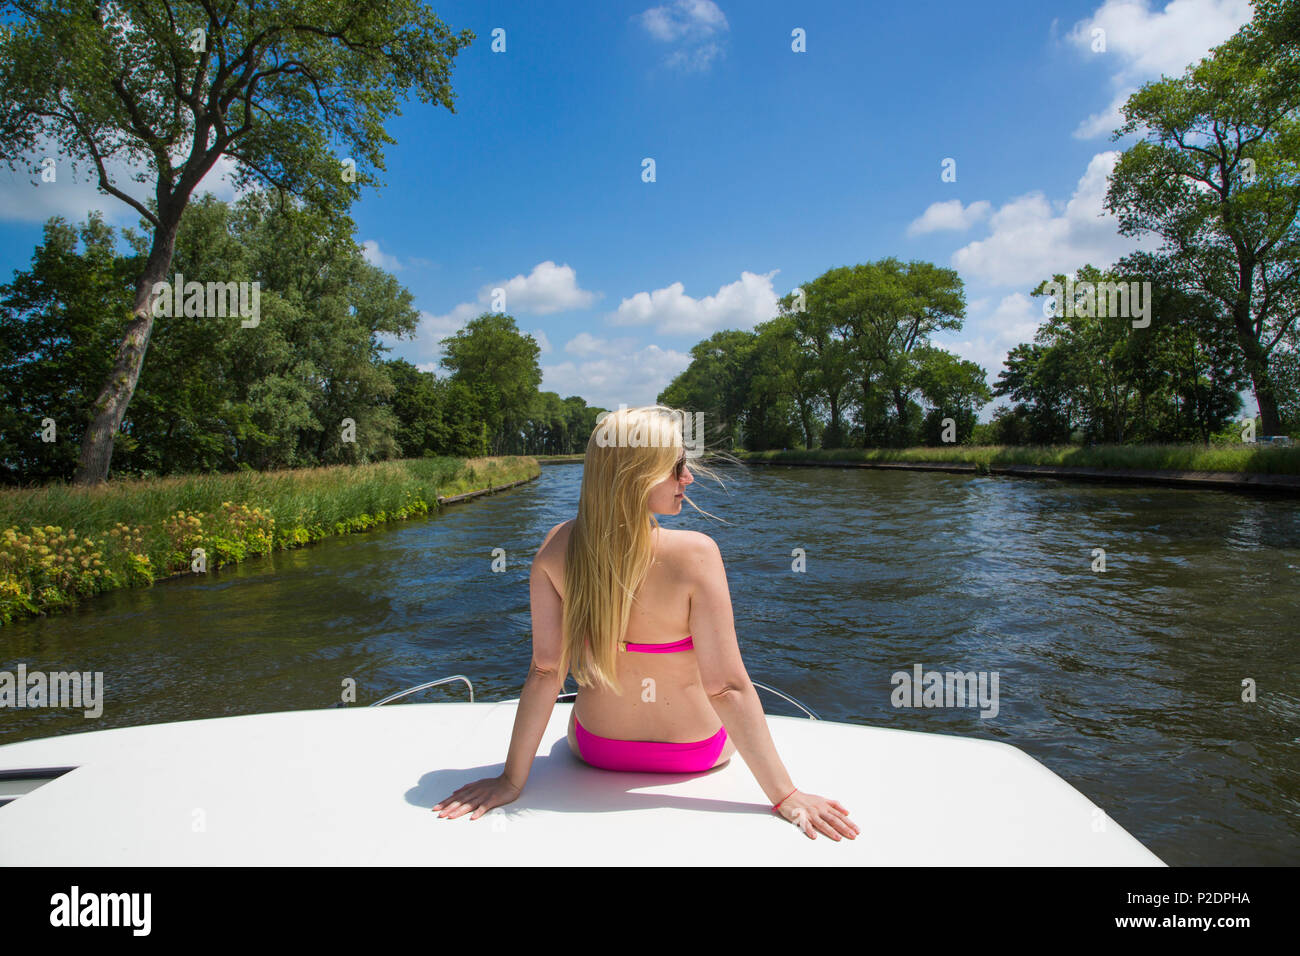 Young blonde woman wearing a bikini relaxes on deck of a Le Boat Royal Mystique houseboat on the Plassendale - Niuewpoort canal, Stock Photo